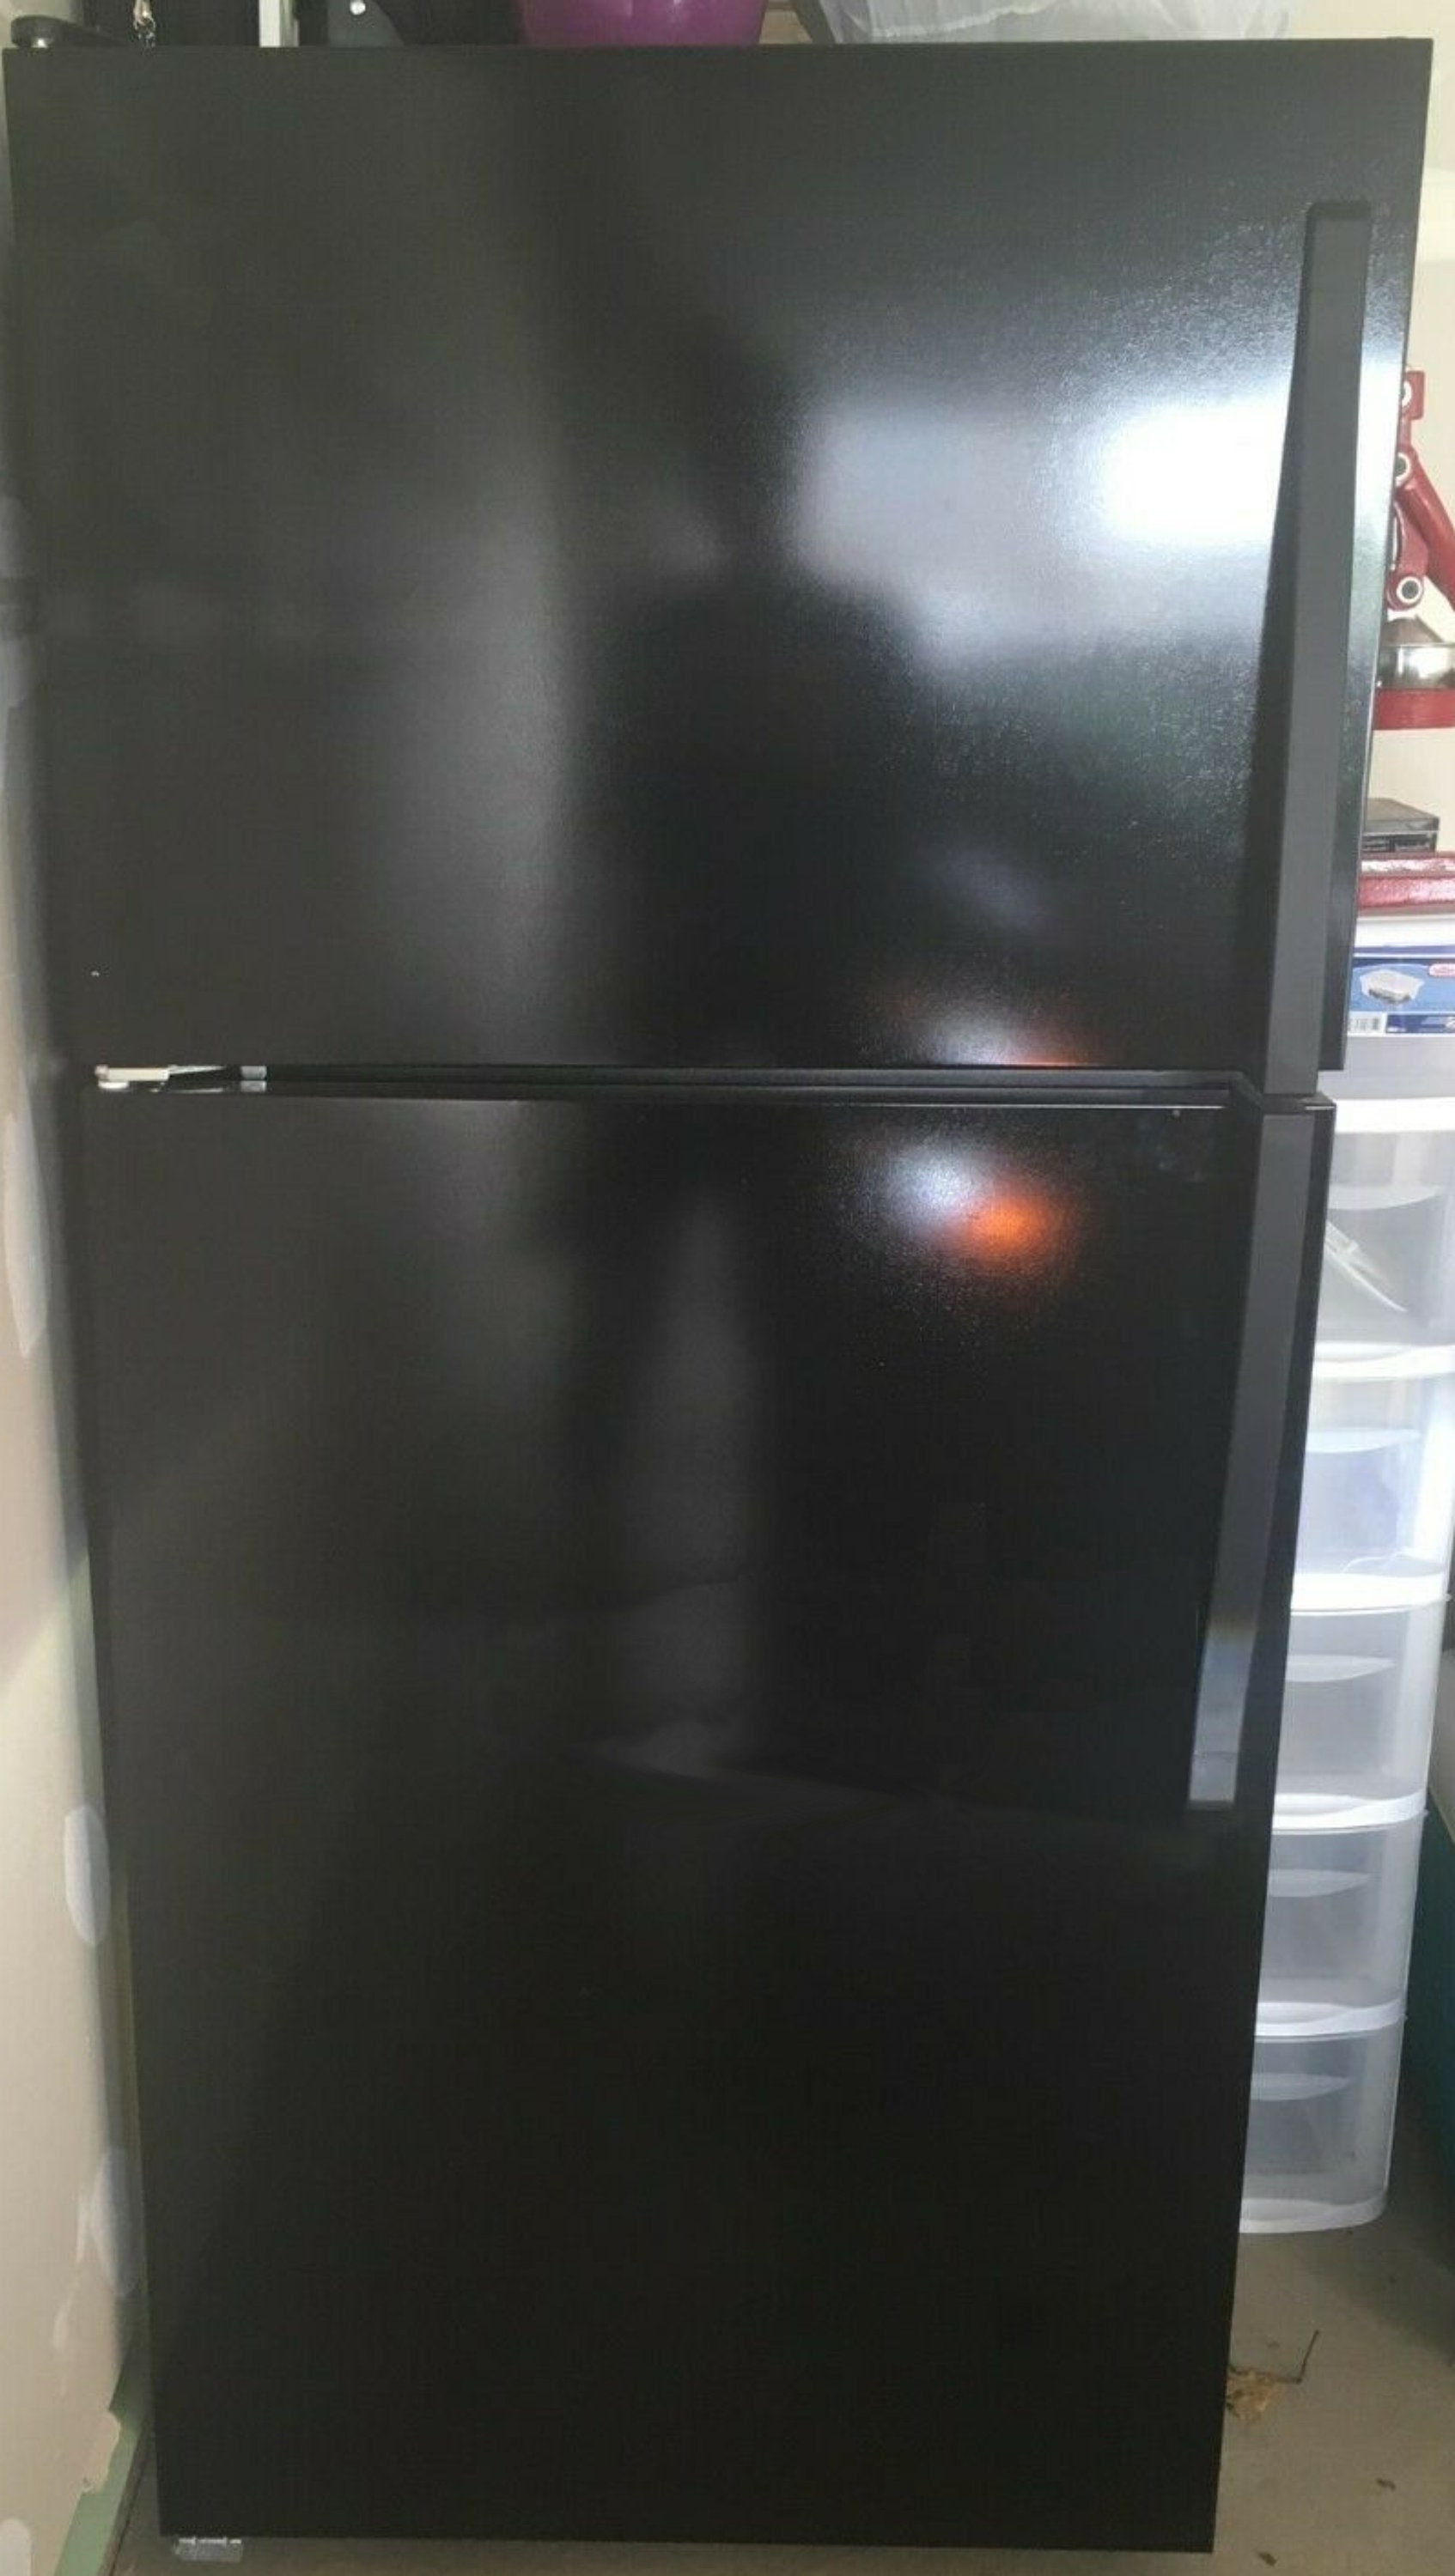 Gloss Black Magnetic French Door Refrigerator Covers, Black Magnet Skins,  Covers and Panels are BIG ma…